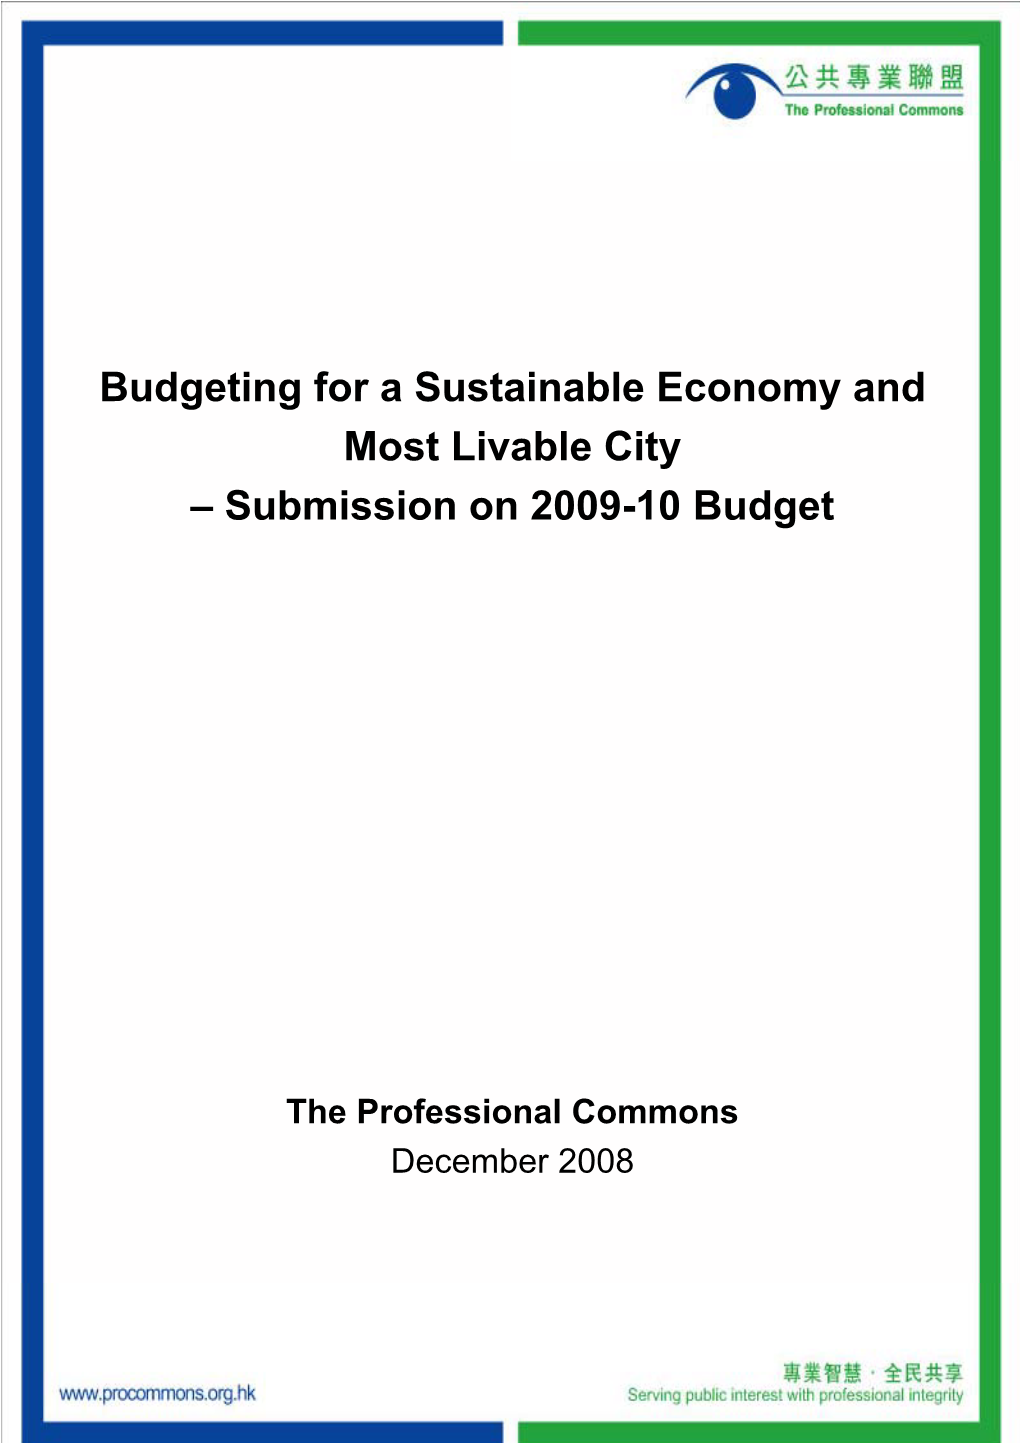 Submission on Ainable Economy and Able City N 2009-10 Budget